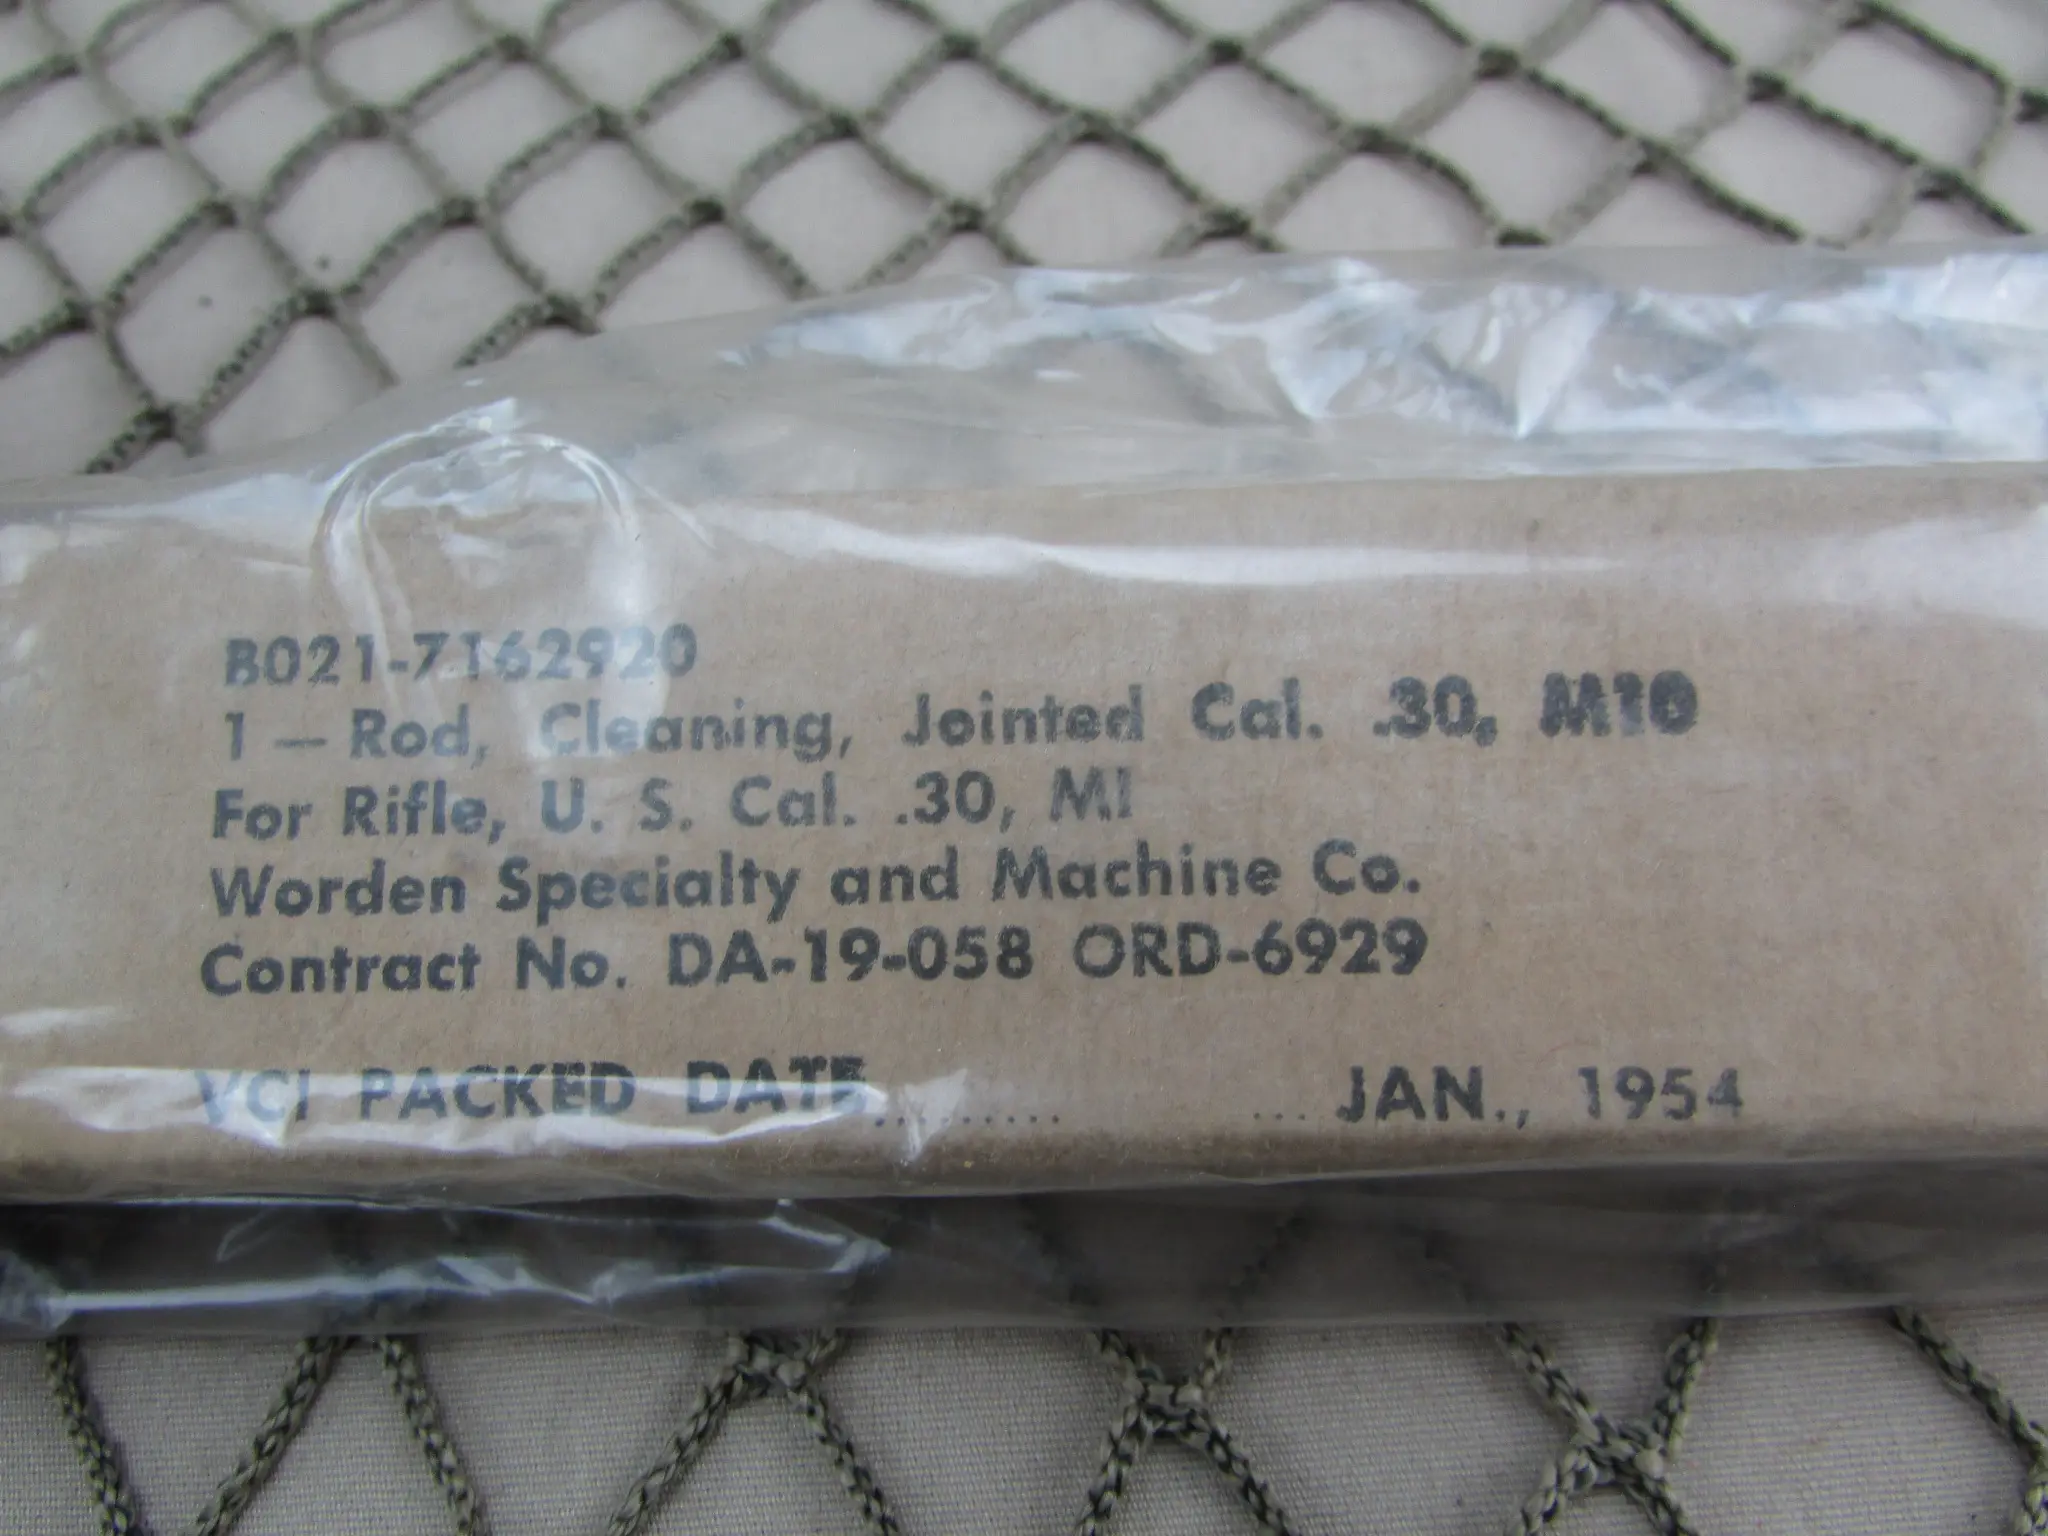 M10 M1 Garand Jointed Cleaning Rod in box, NOS, 1/54 by Worden ...